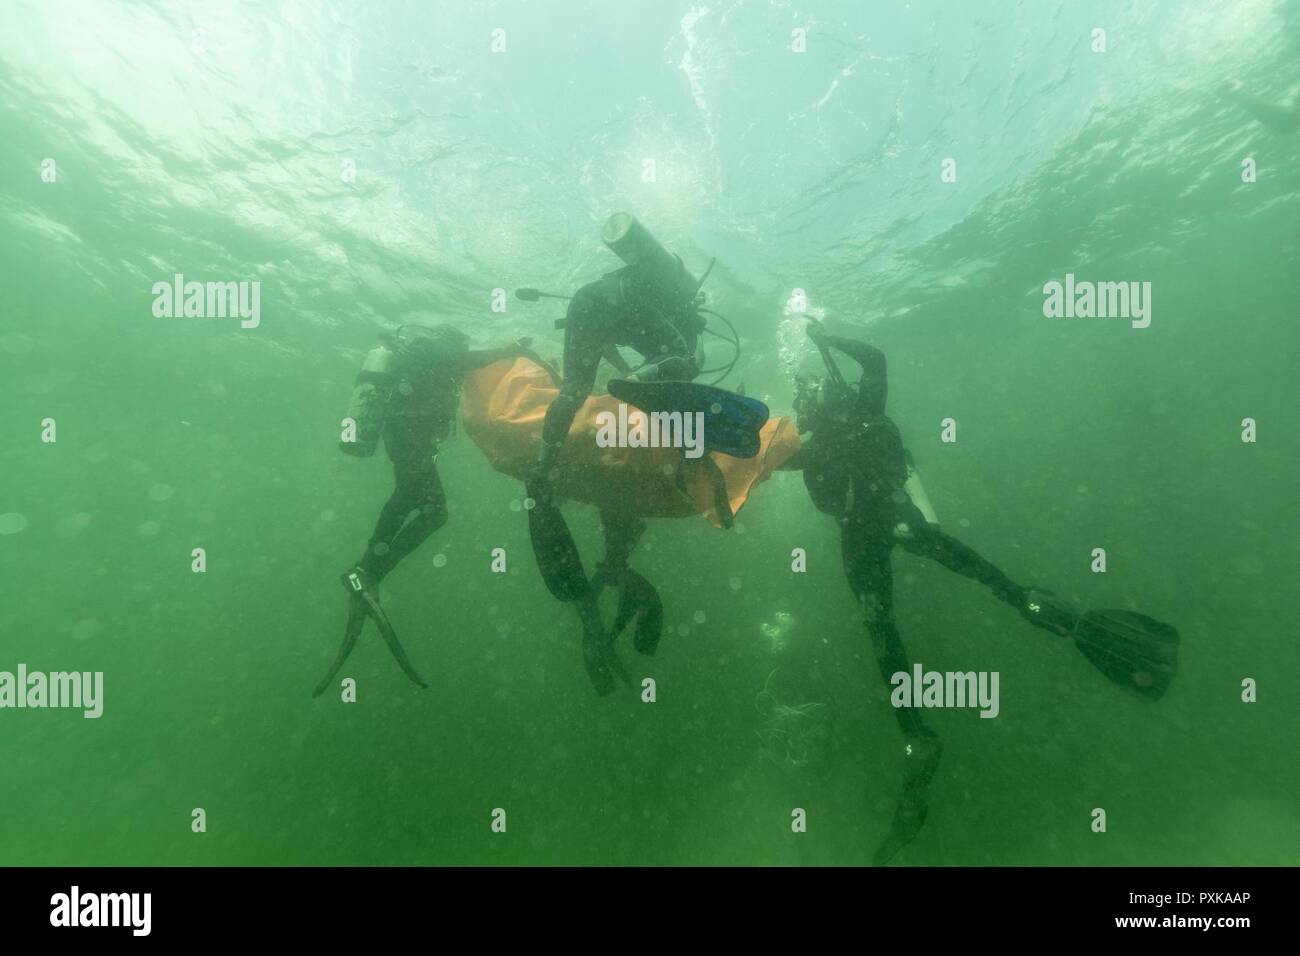 PORT OF SPAIN, Trinidad - Caribbean divers practice to recover a simulated body during Exercise TRADEWINDS 17 in Chaguaramas, Trinidad and Tobago on June 4, 2017.  (Canadian Forces Combat Camera Stock Photo